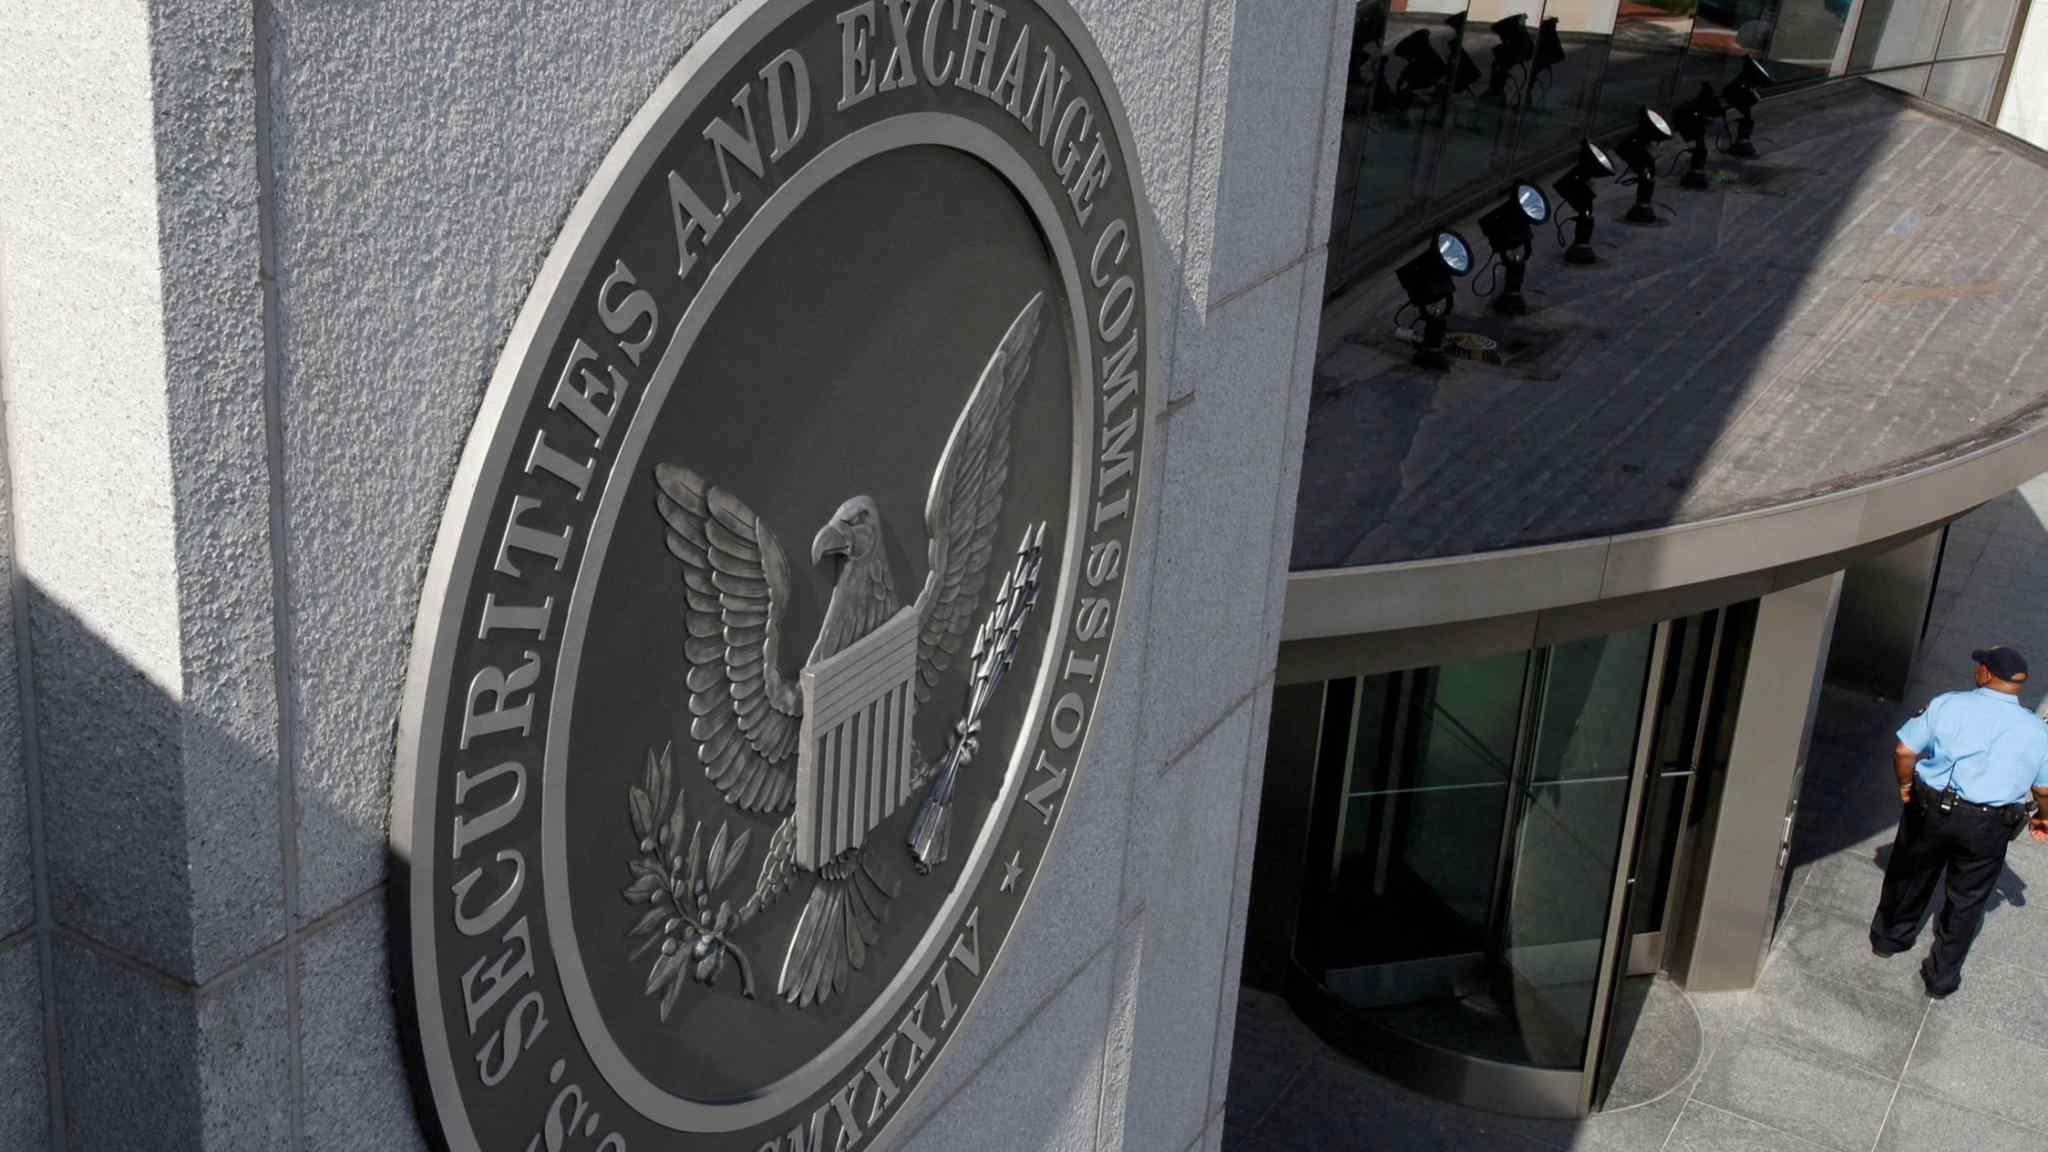 SEC hands out $79mn in fines over latest round of messaging violations